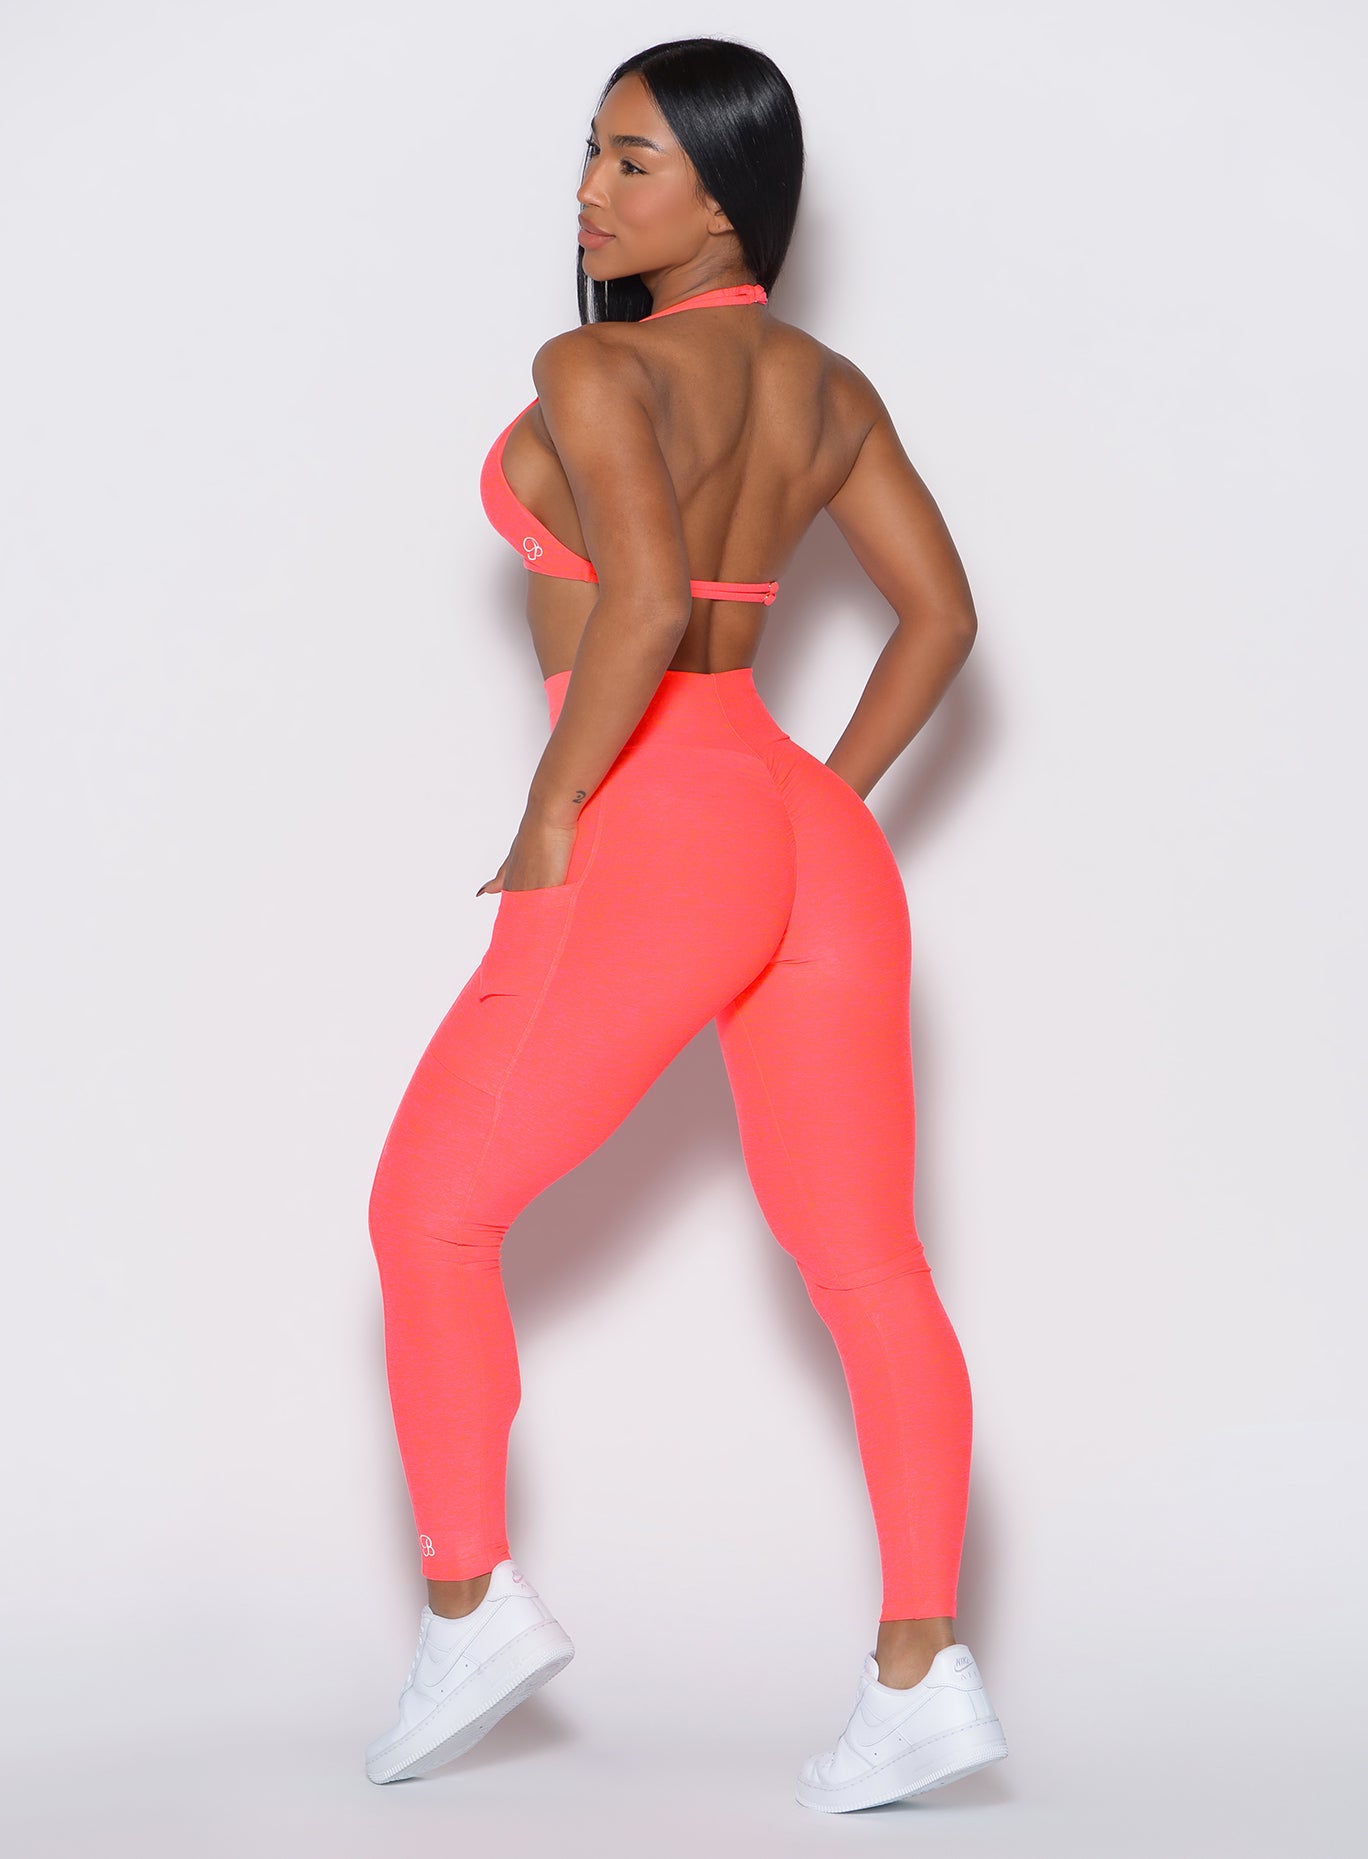 back profile view of a model wearing our curves leggings in Neon Apricot Pink color along with the matching sports bra